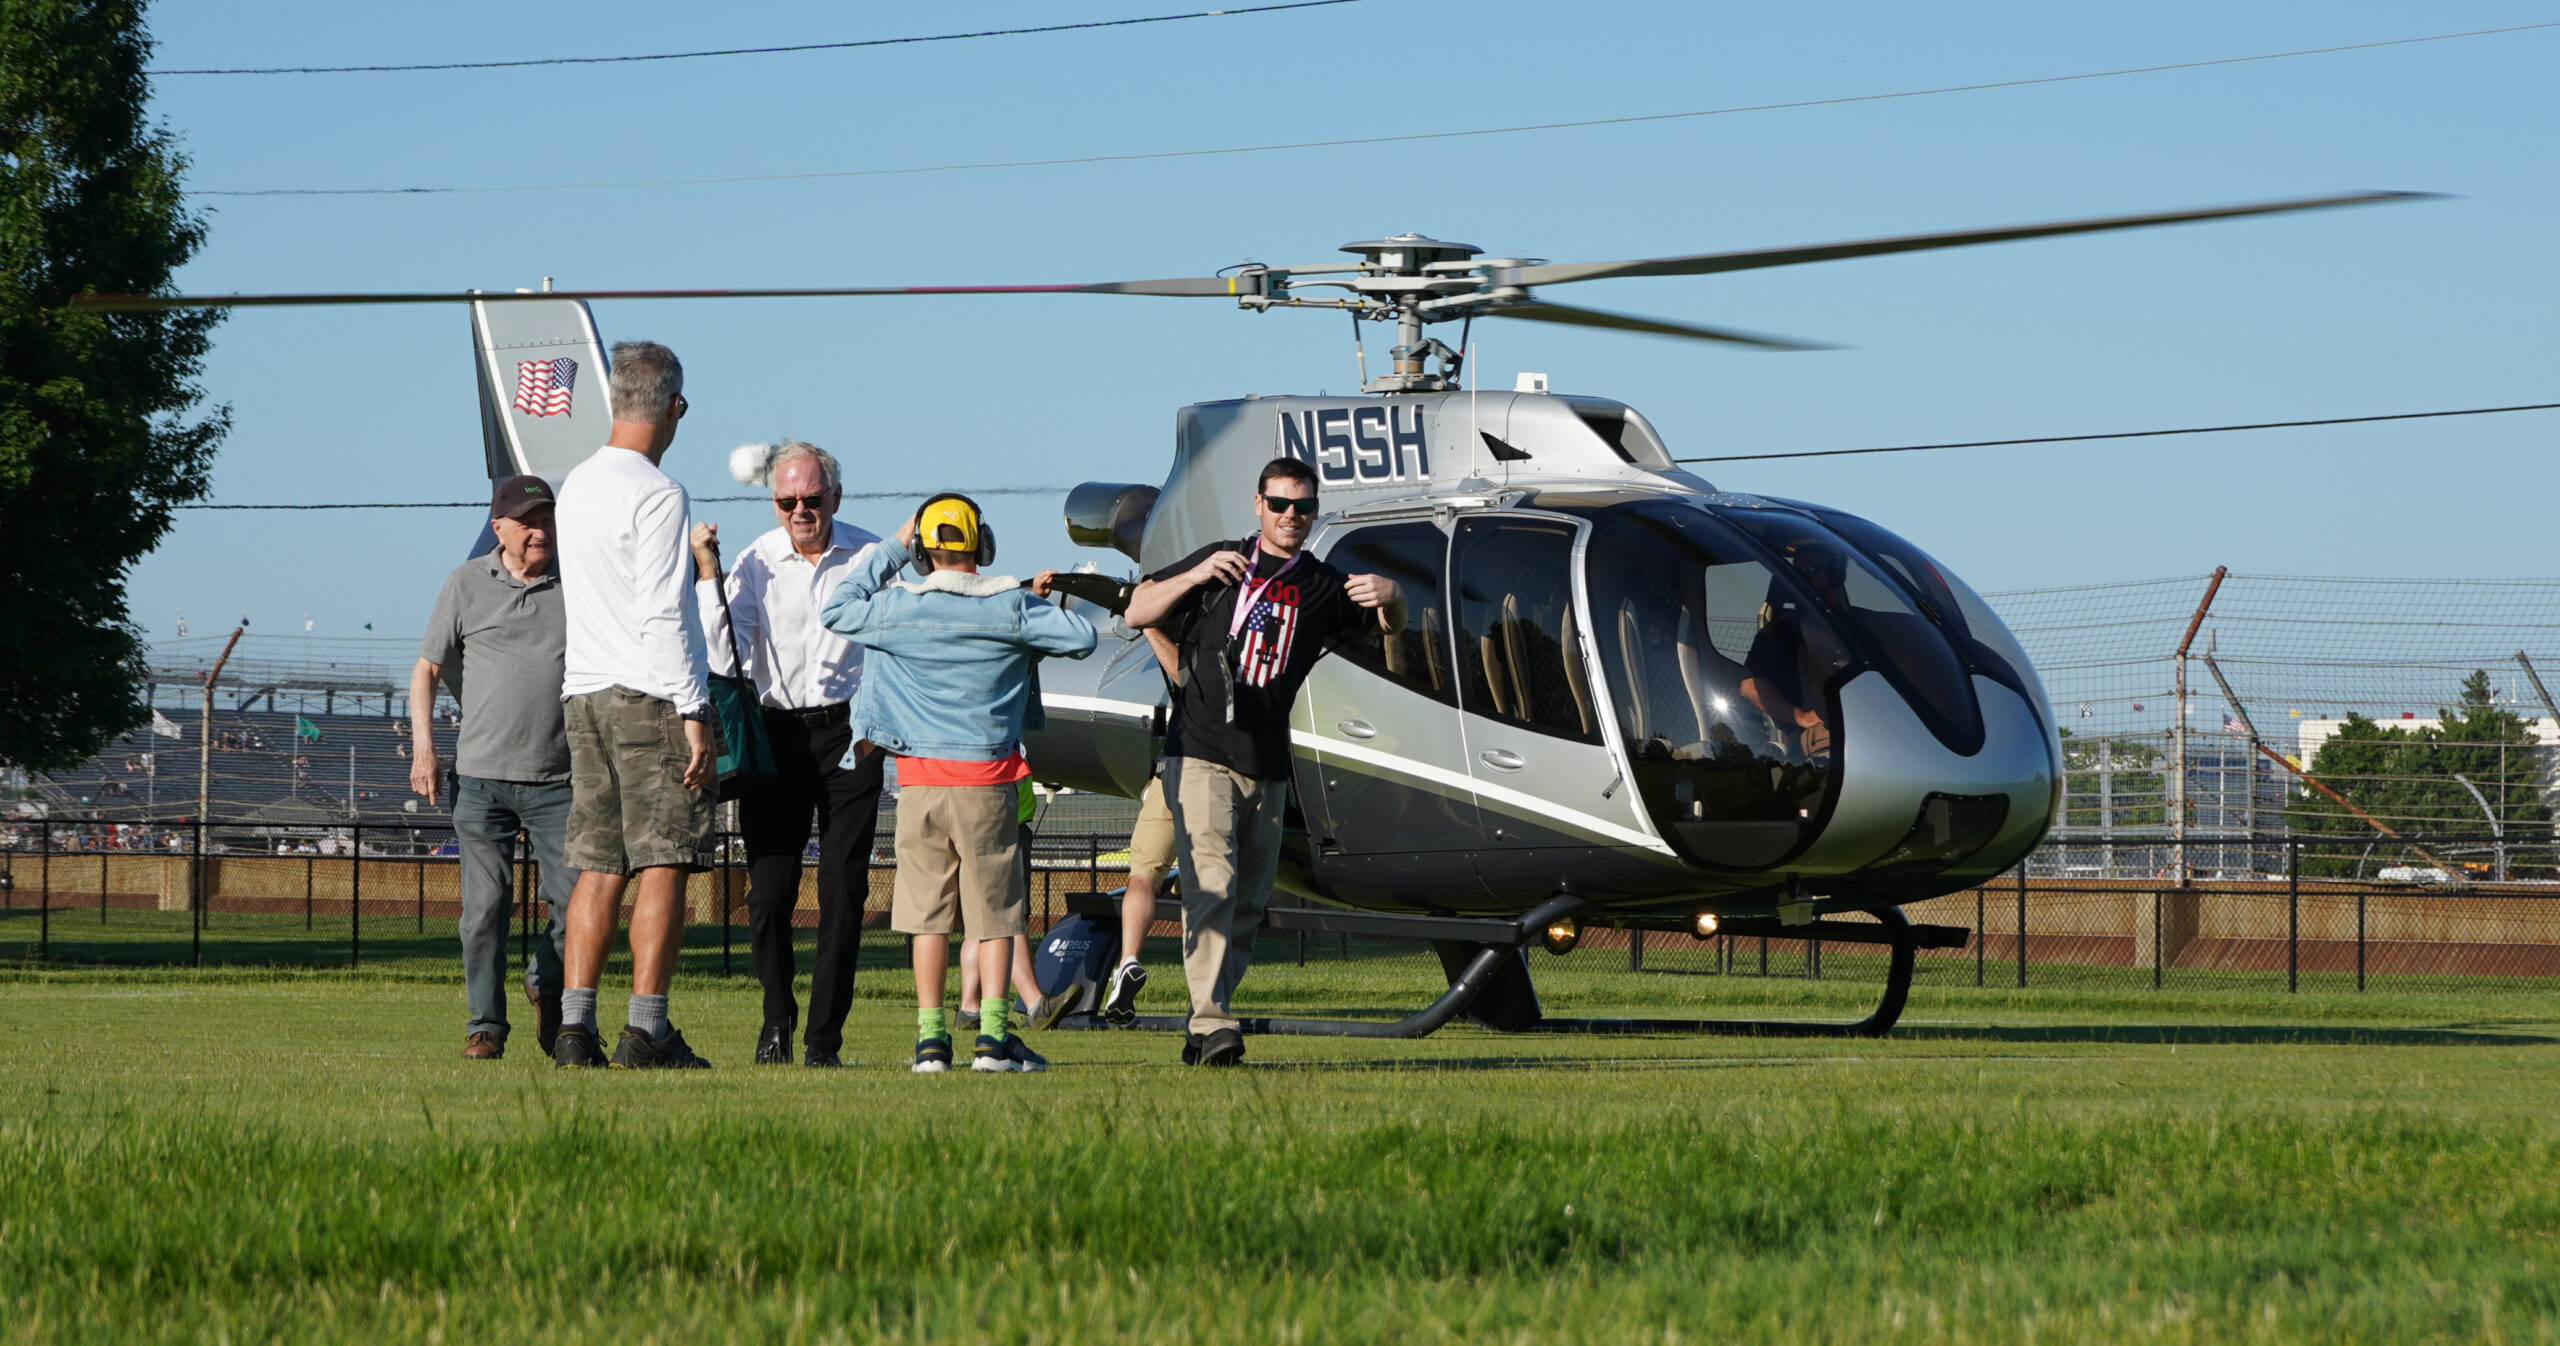 Sweet Helicopters safely transports nearly 300 passengers to the Indianapolis 500